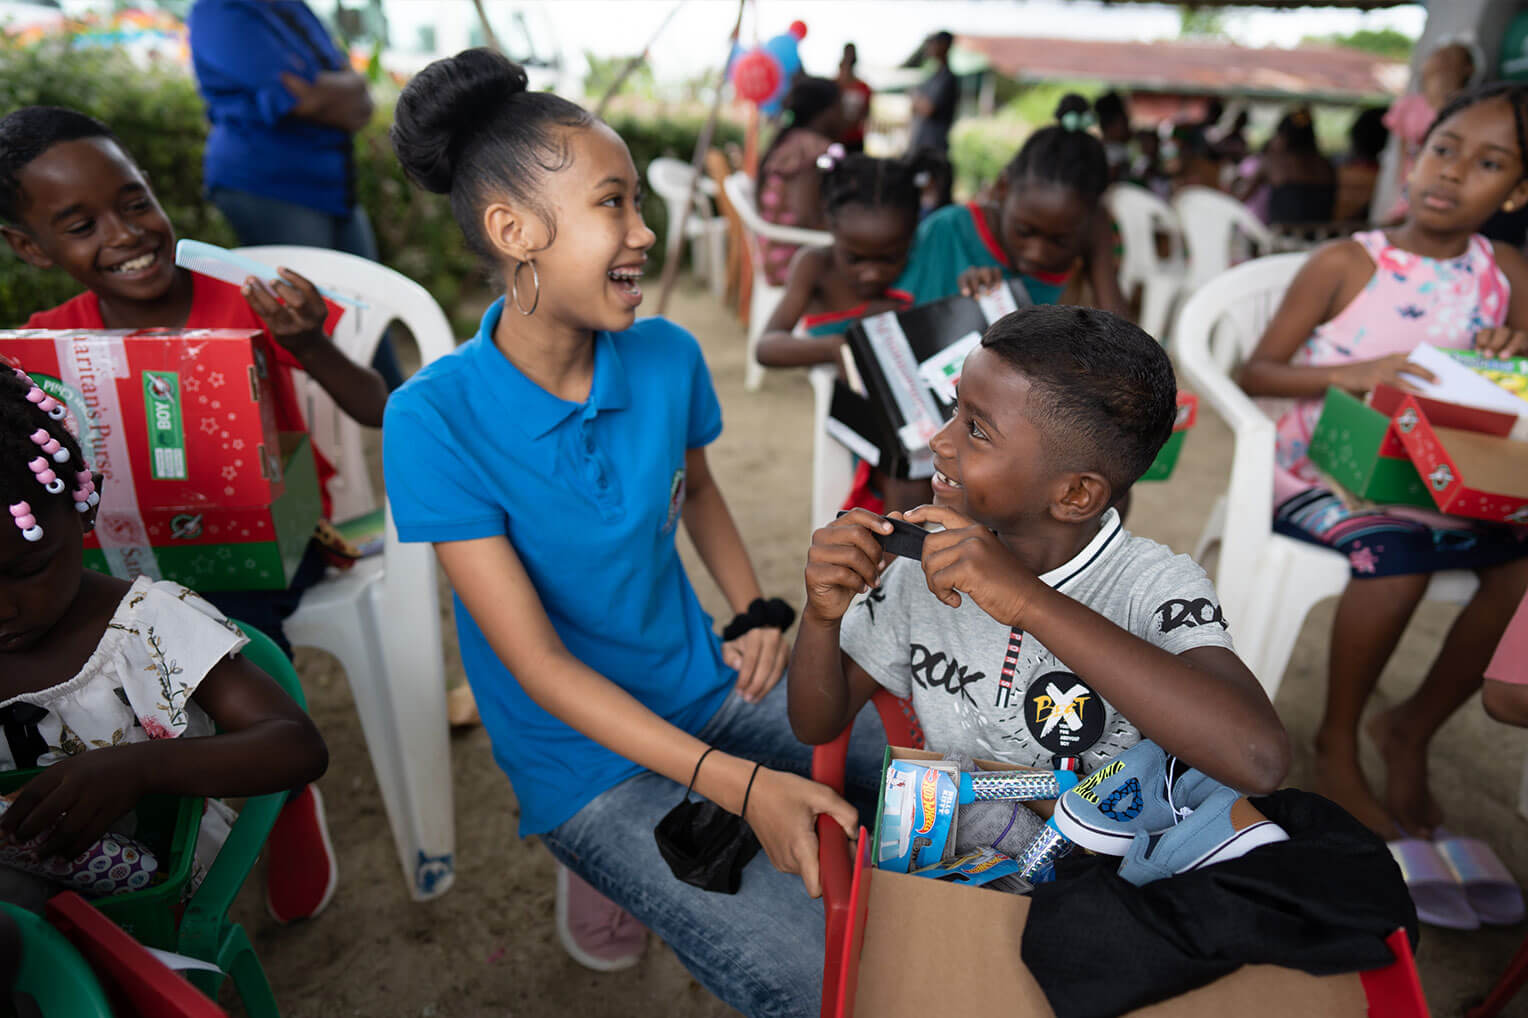 Charahja celebrates opening shoeboxes with young children.